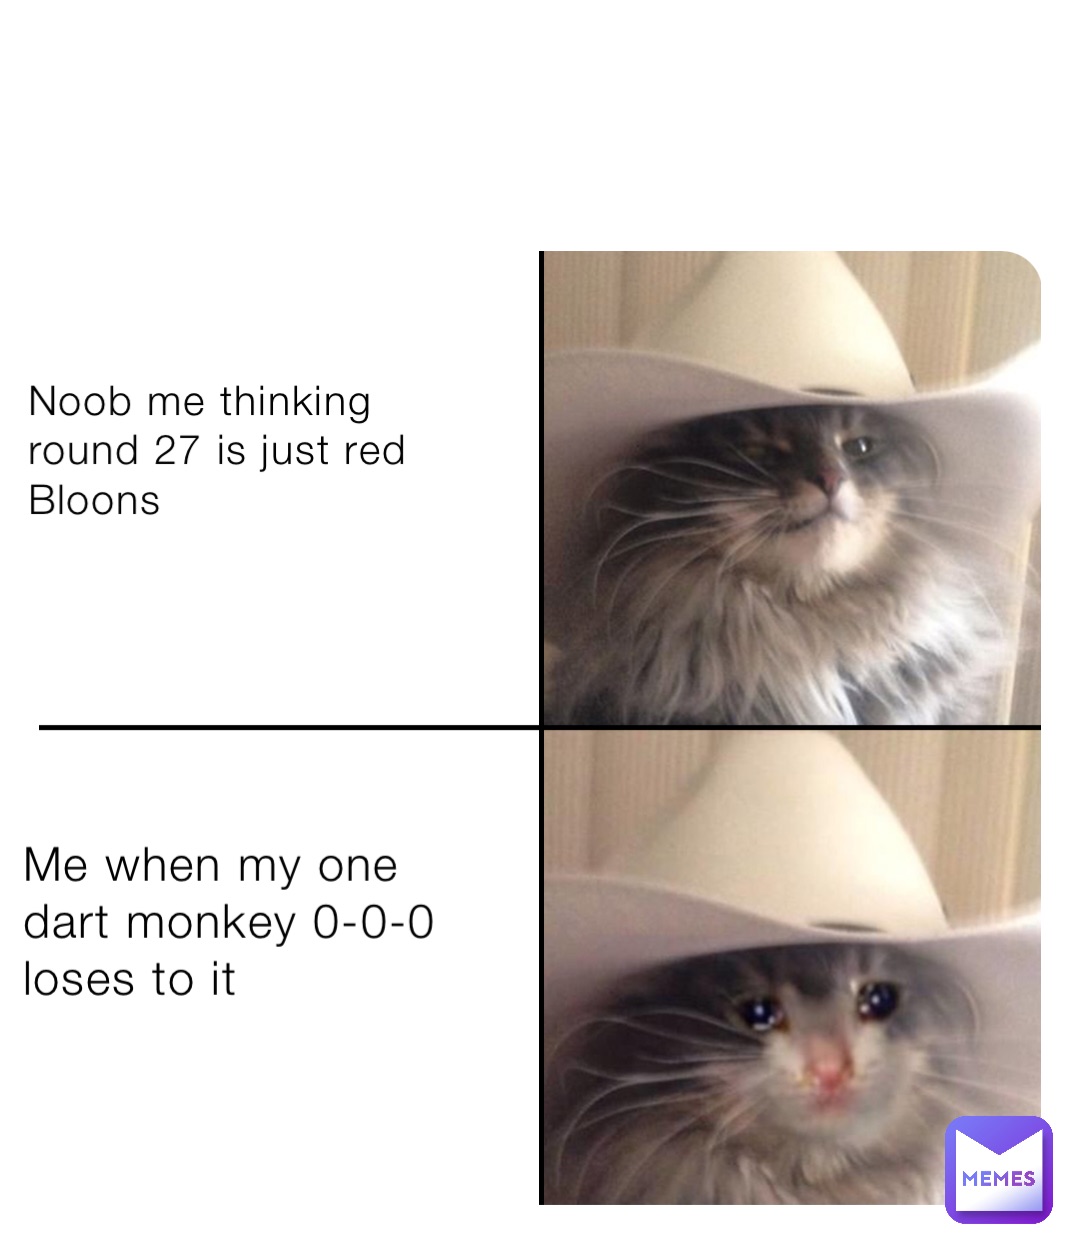 Noob me thinking round 27 is just red Bloons Me when my one dart monkey 0-0-0 loses to it